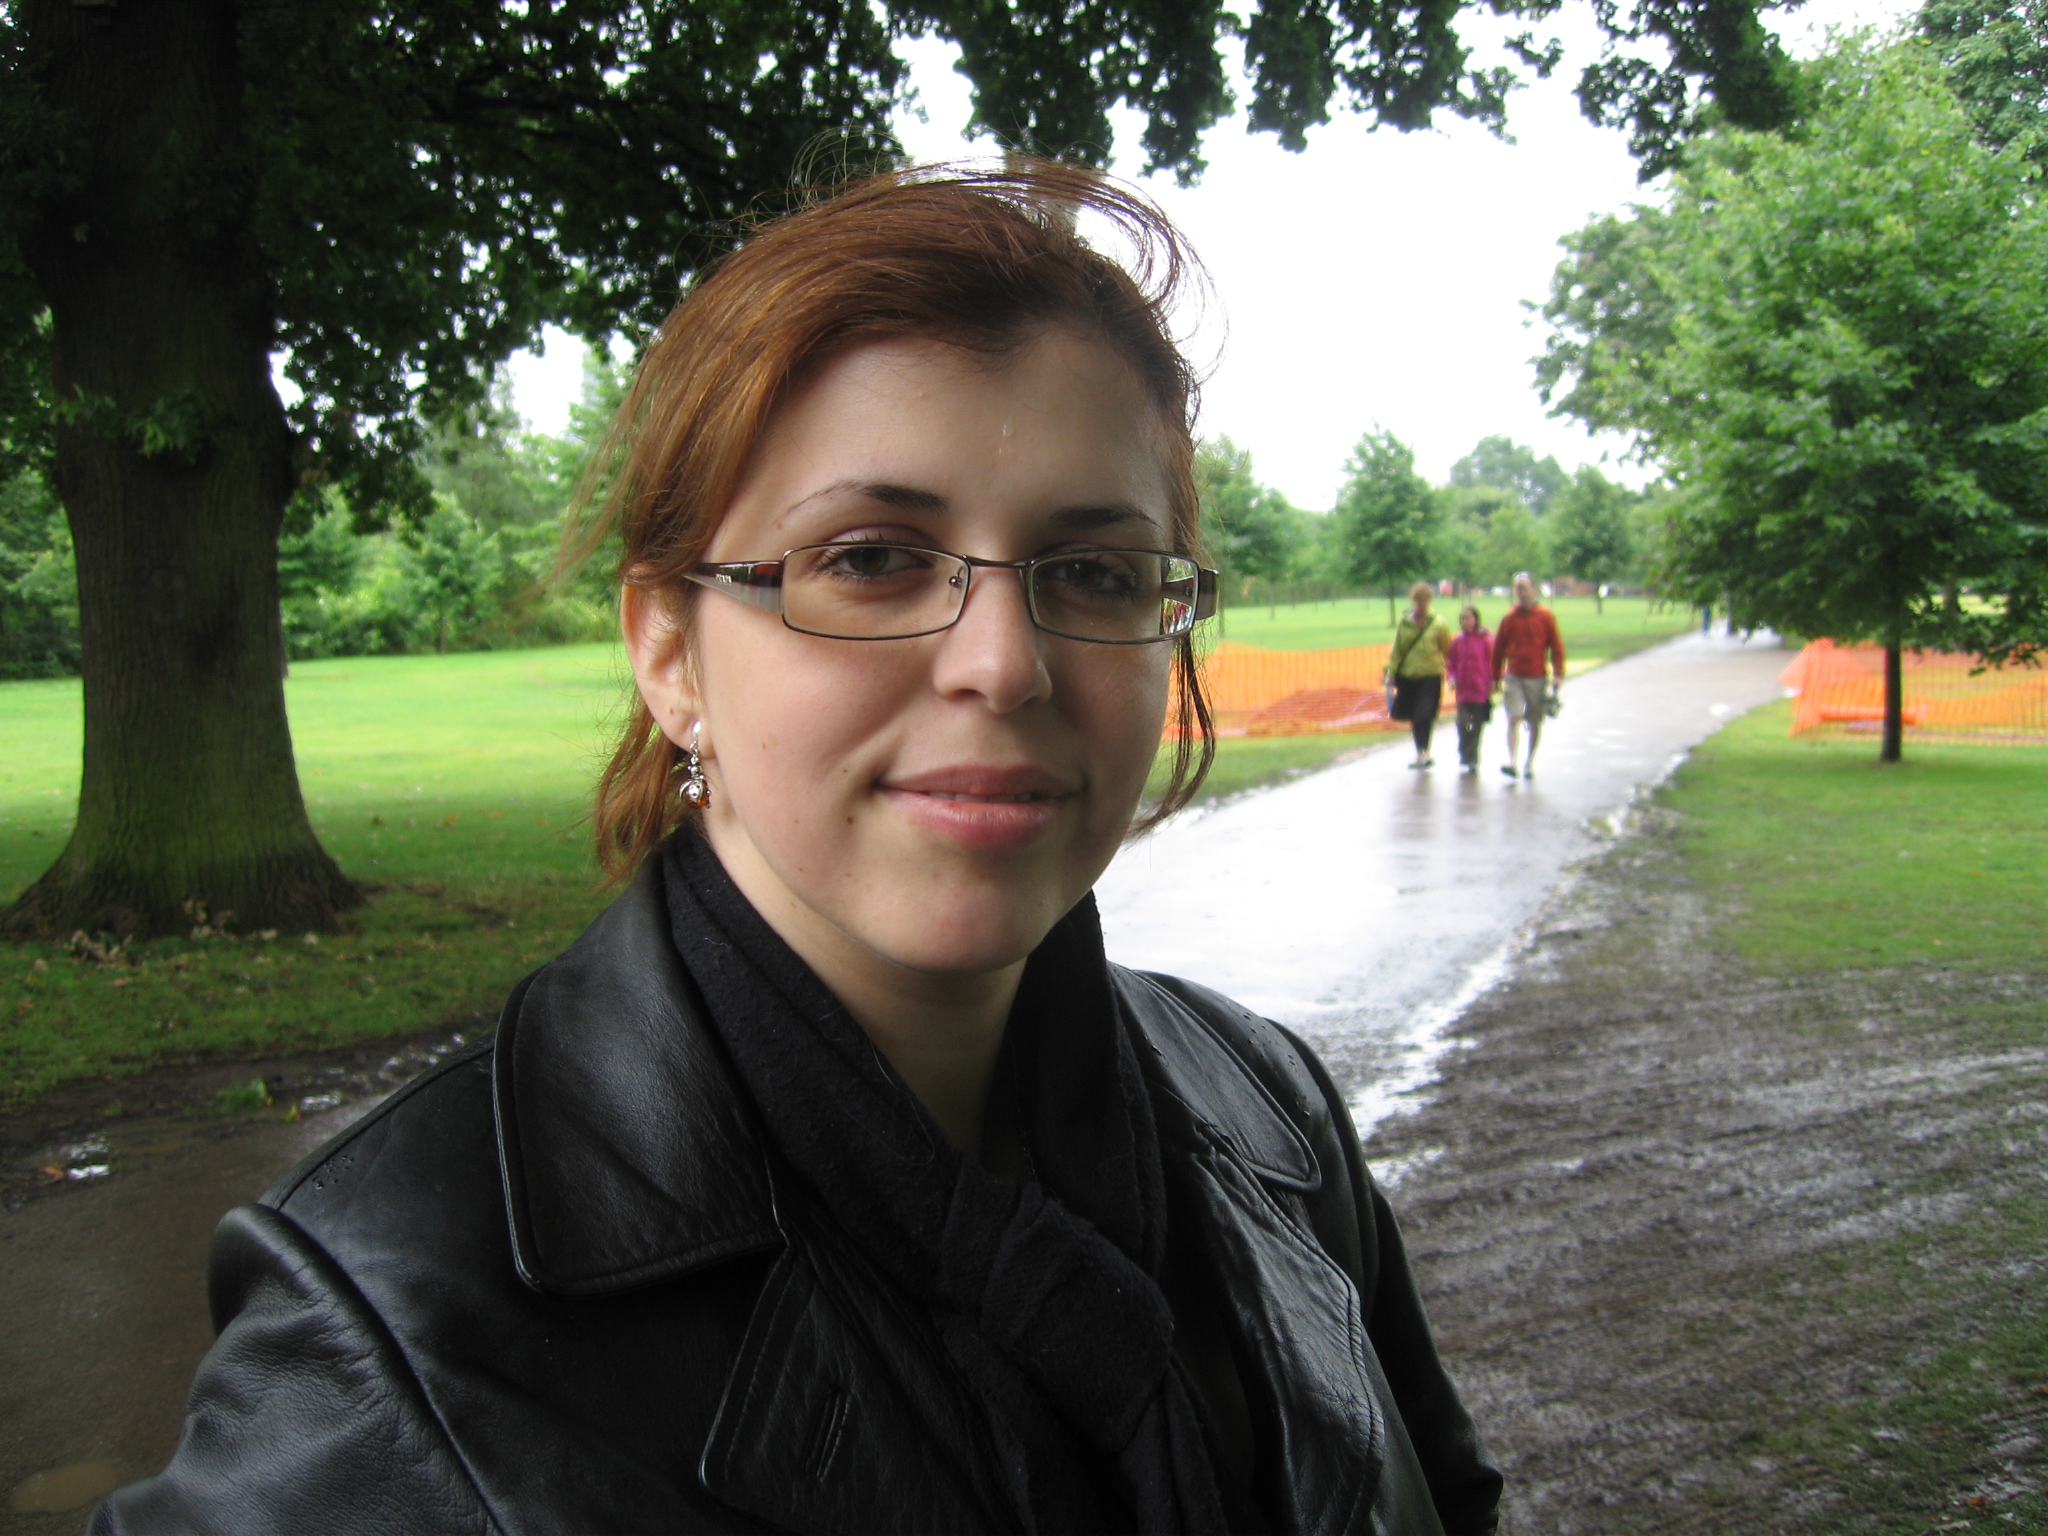 a woman wearing glasses in the rain, looking directly at the camera